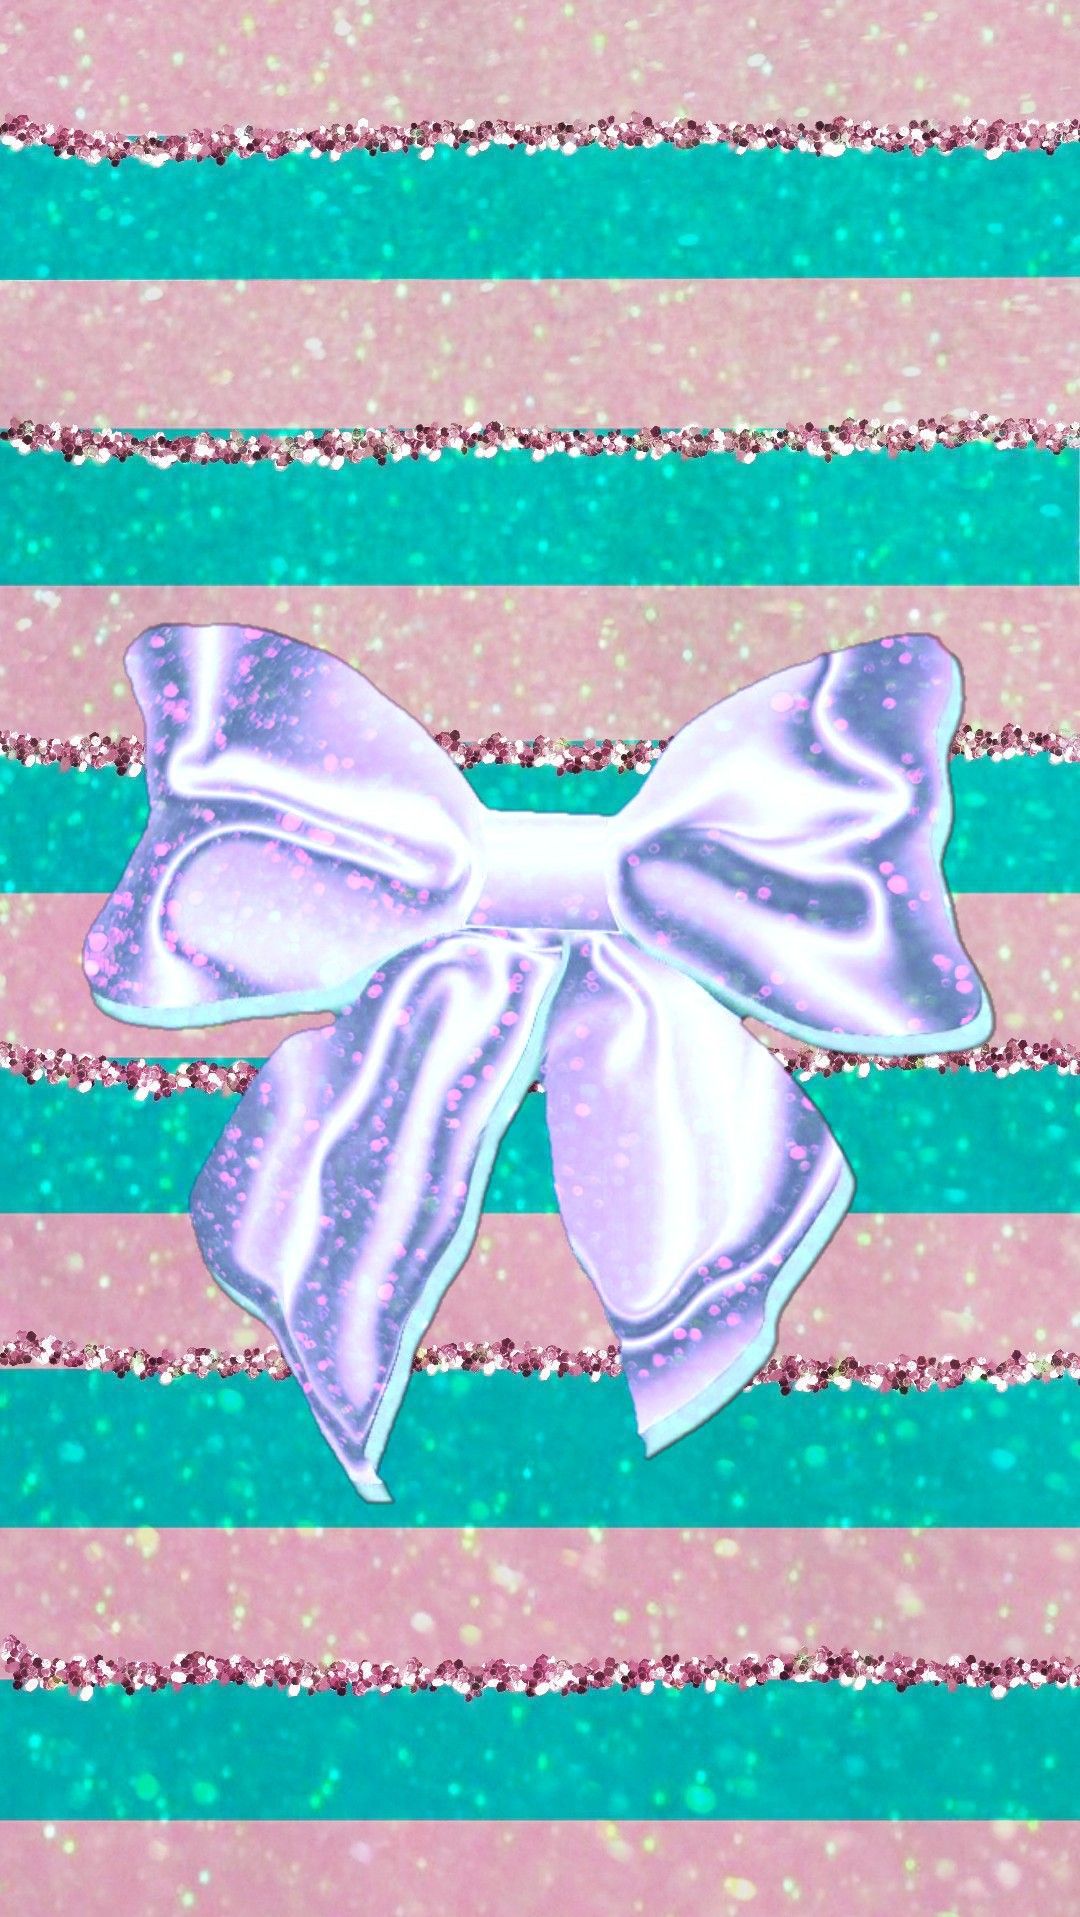 Glittery Bow, made by me #patterns #blue #glitter #sparkles #galaxy # wallpaper #background #sparkles. Bow wallpaper, Glitter phone wallpaper, iPhone wallpaper